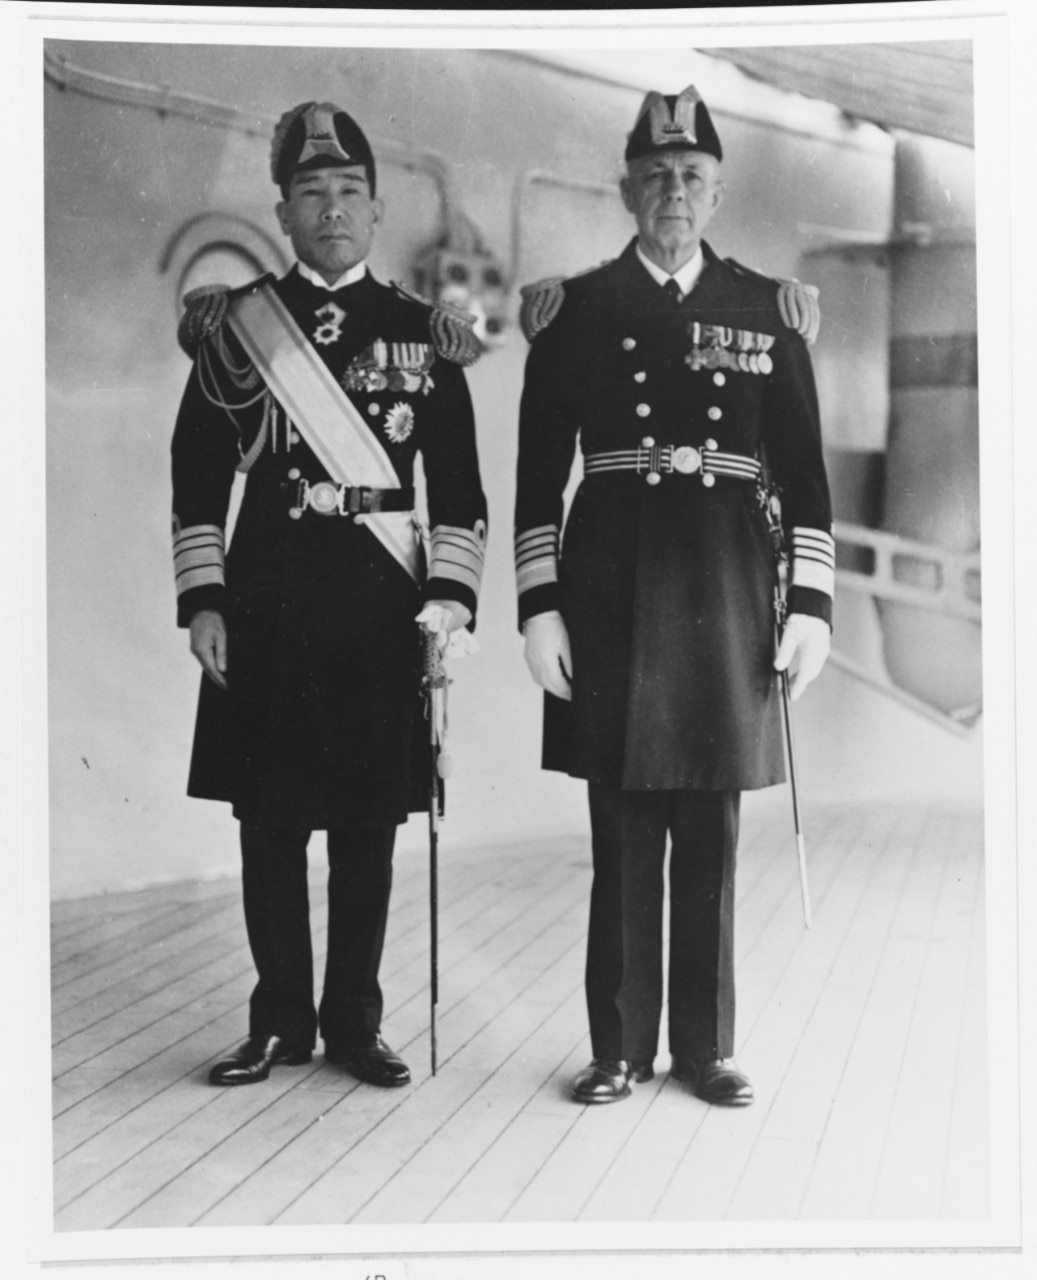 Admiral Harry E. Yarnell, USN, right, with Vice Admiral Kiyoshi Hasegawa, IJN, aboard USS Augusta (CA-31) at Shanghai, China, in May 1937. Hasegawa commanded the Japanese Third Fleet while Yarnell was CINCAF (NH 81617).